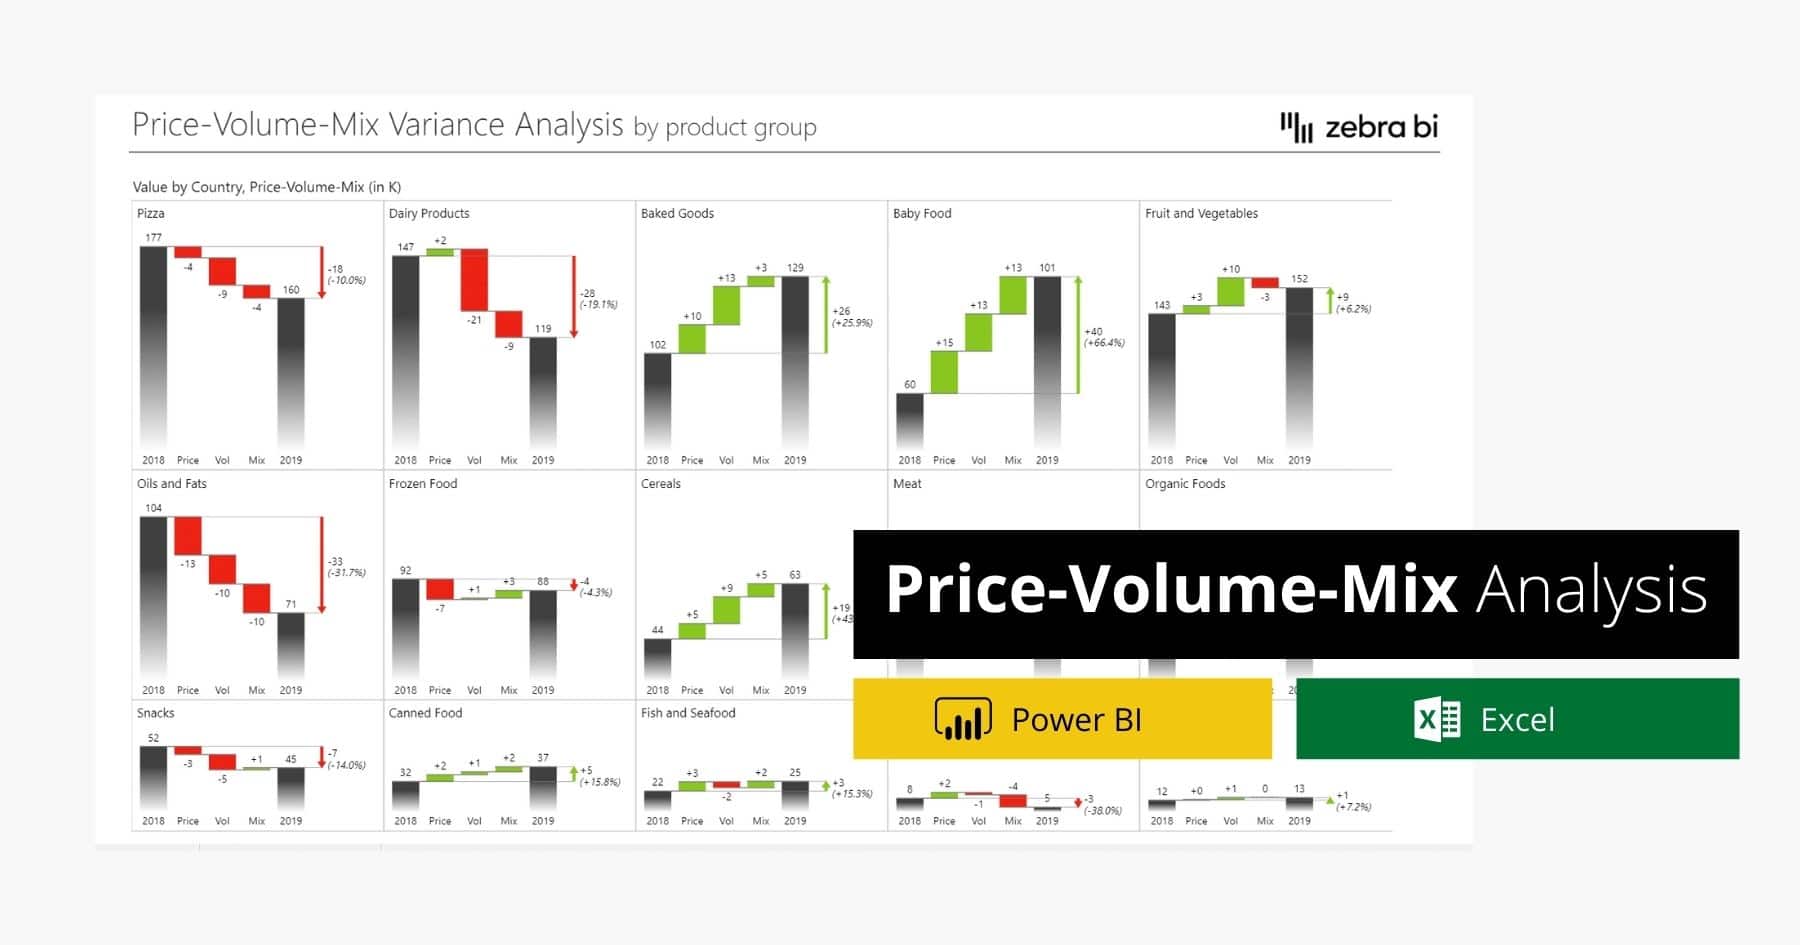 price-volume-mix-analysis-excel-template-weekly-sales-report-template-excel-database-compare